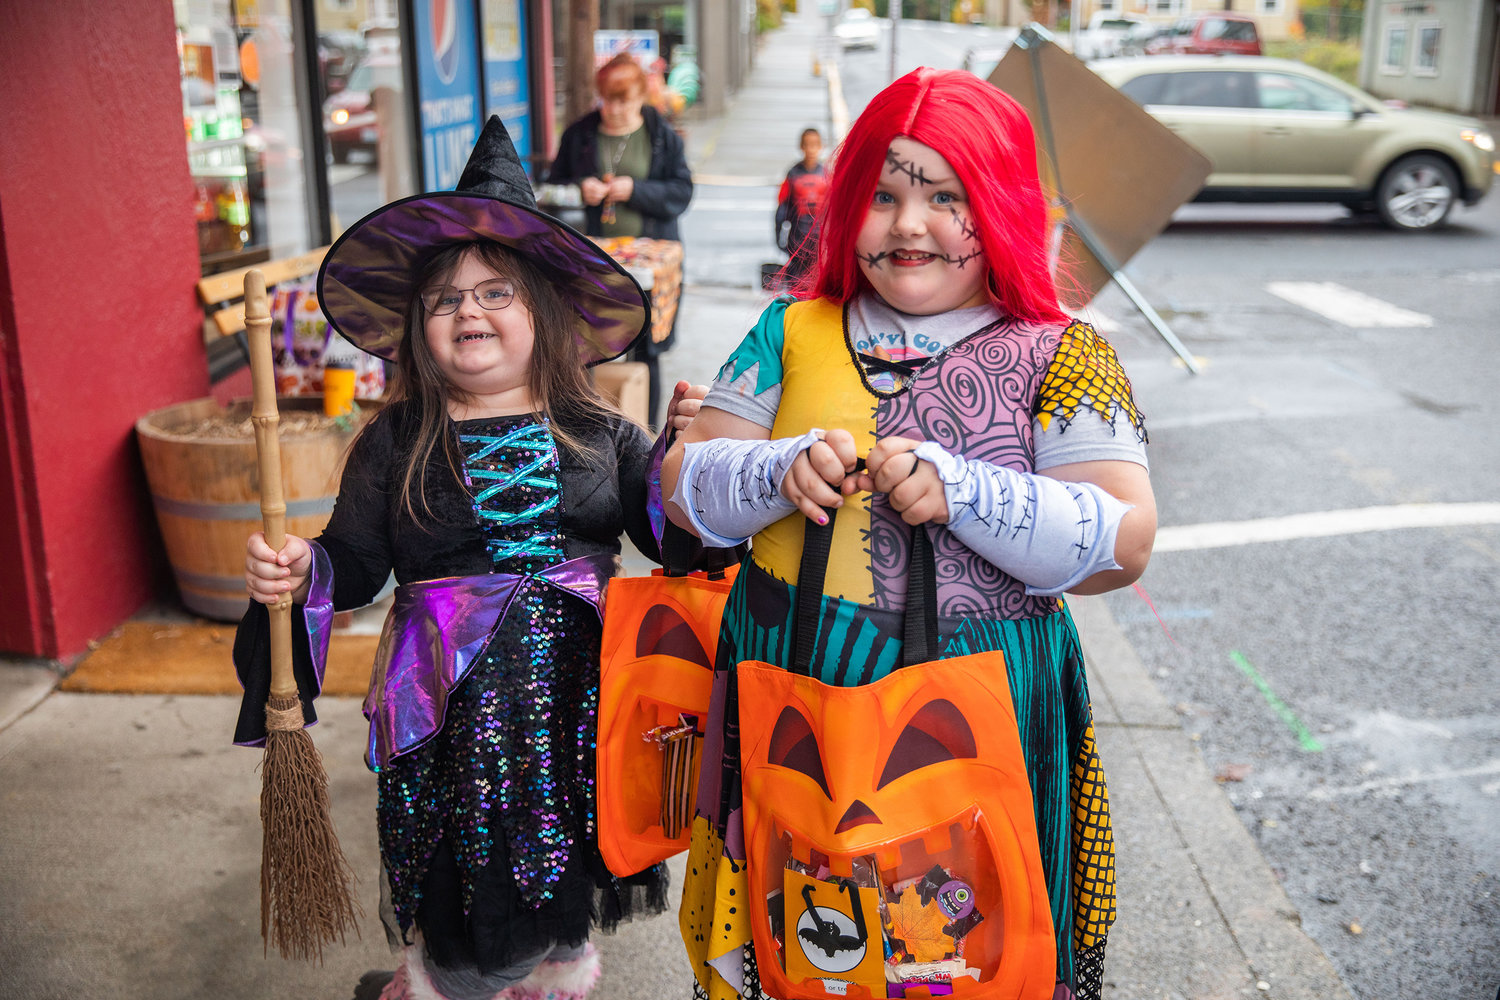 Hanna ,4, and Jade Neyland, 6, smile and pose for a photo while in costume in downtown Winlock on Halloween.